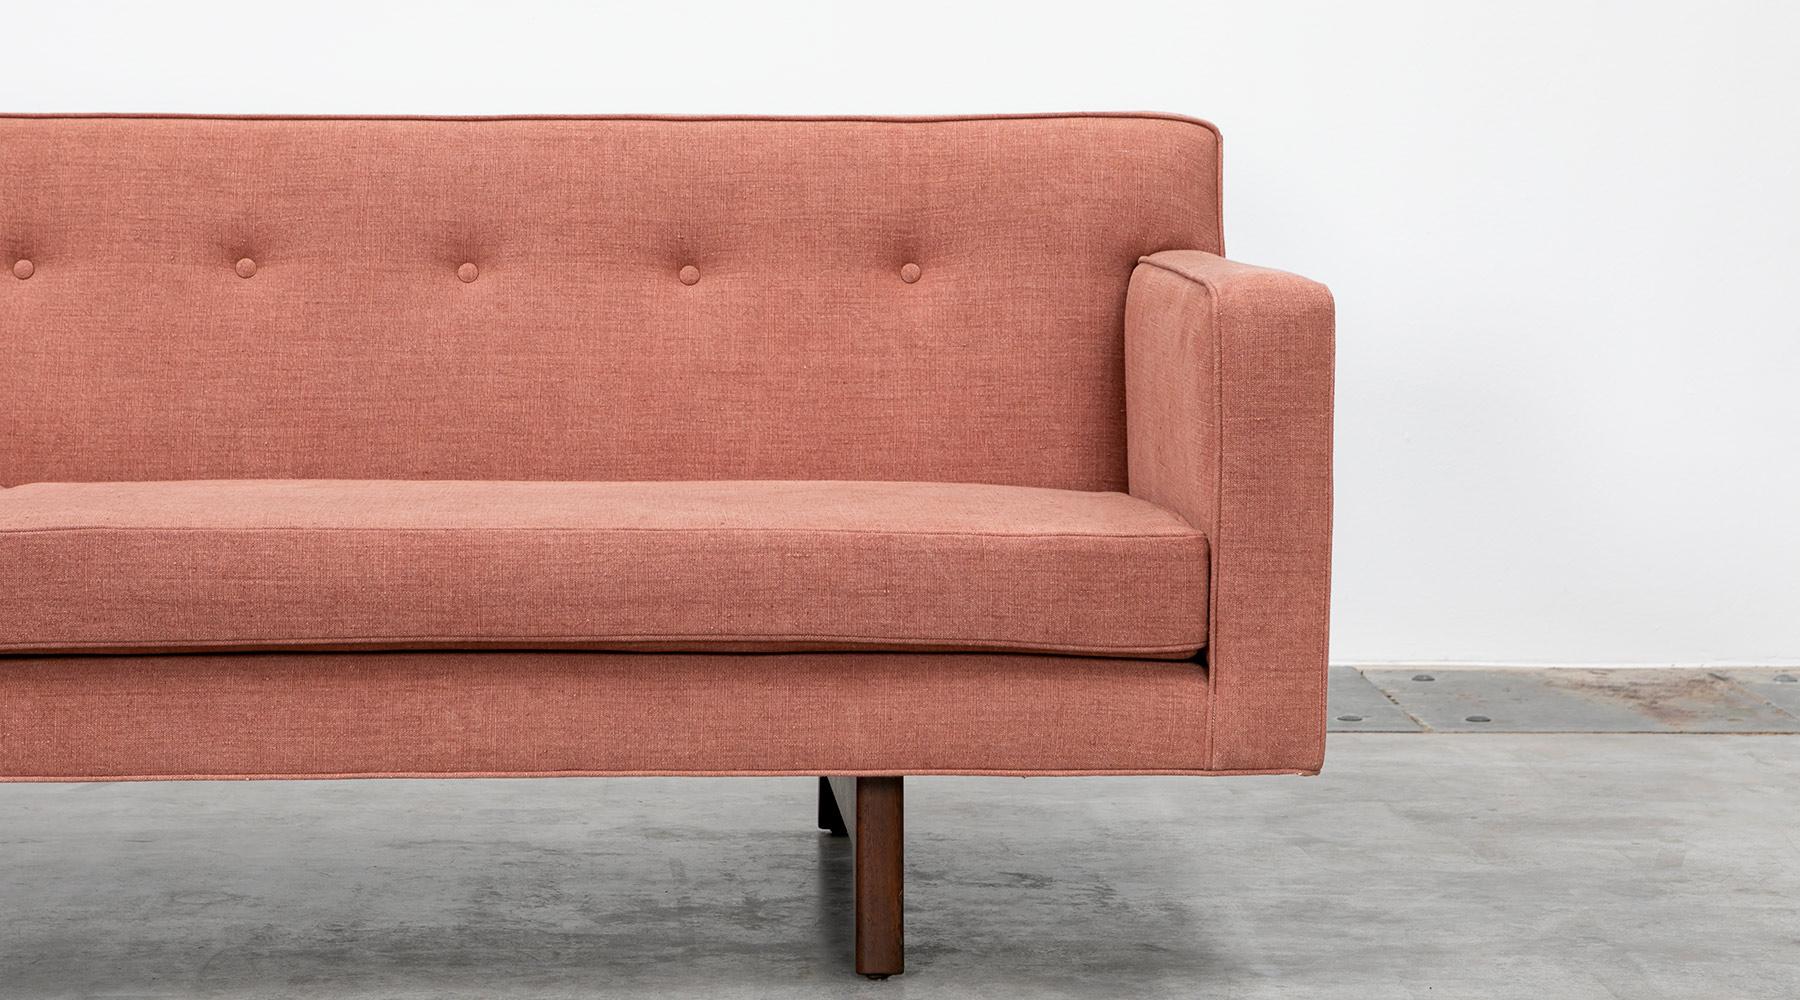 1950s Warm Pink Edward Wormley Sofa 'c' New Upholstery For Sale 2